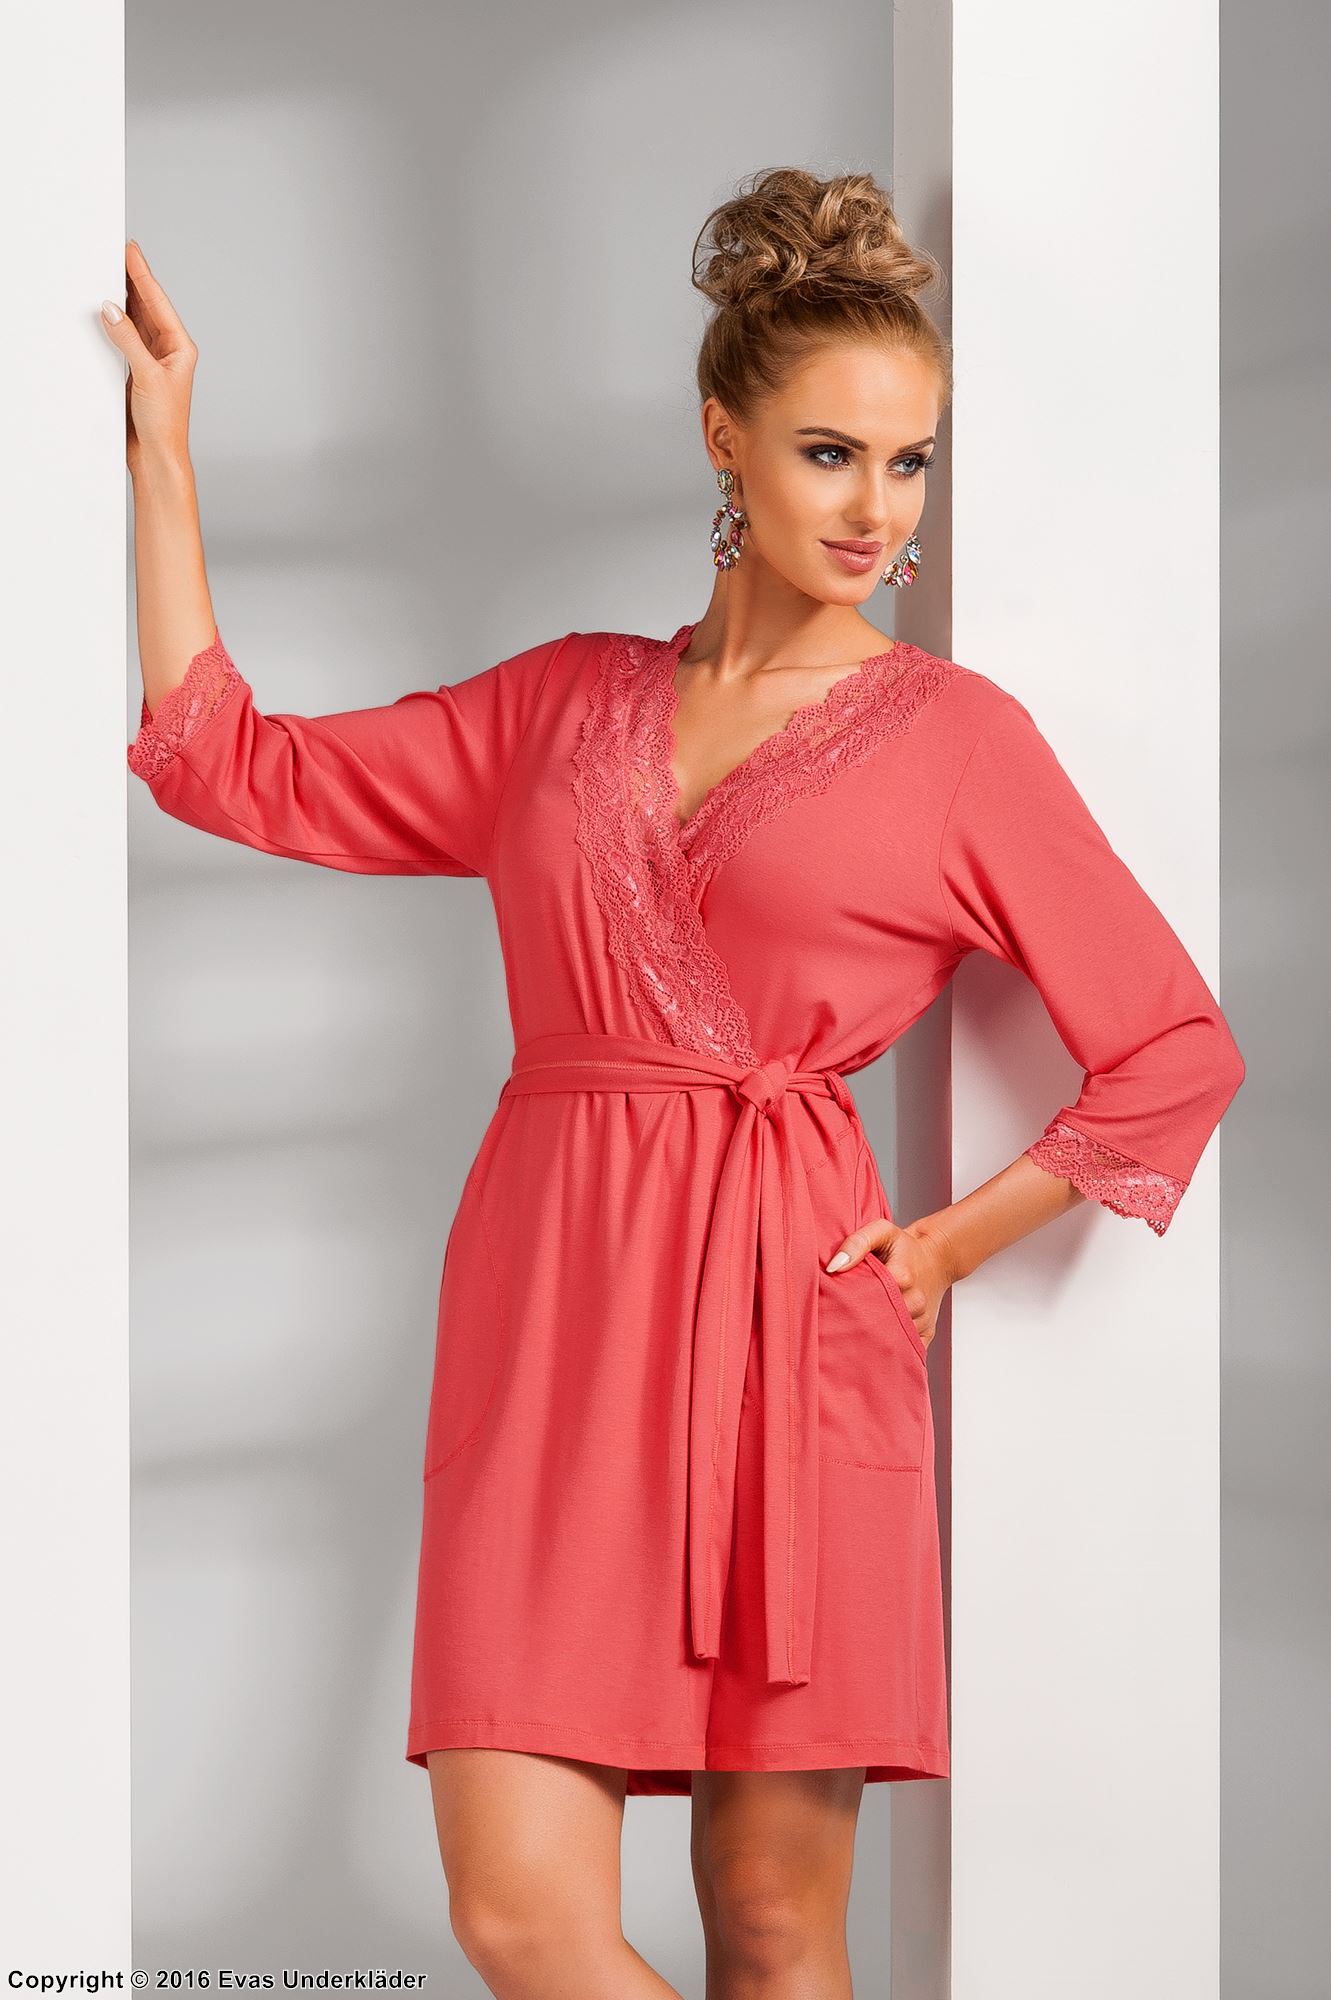 Comfy robe with lace details